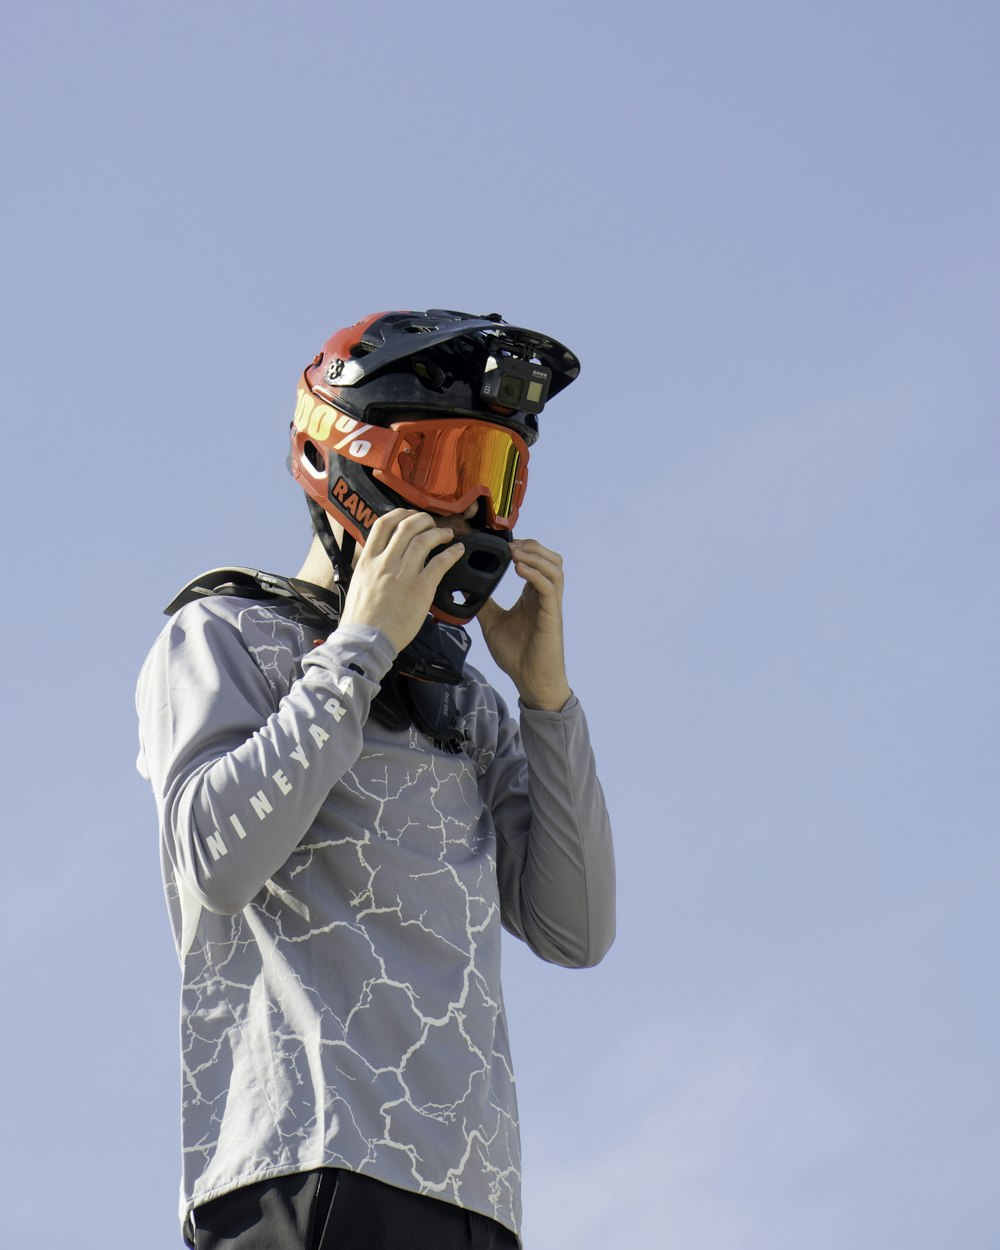 a person wearing a helmet and goggles